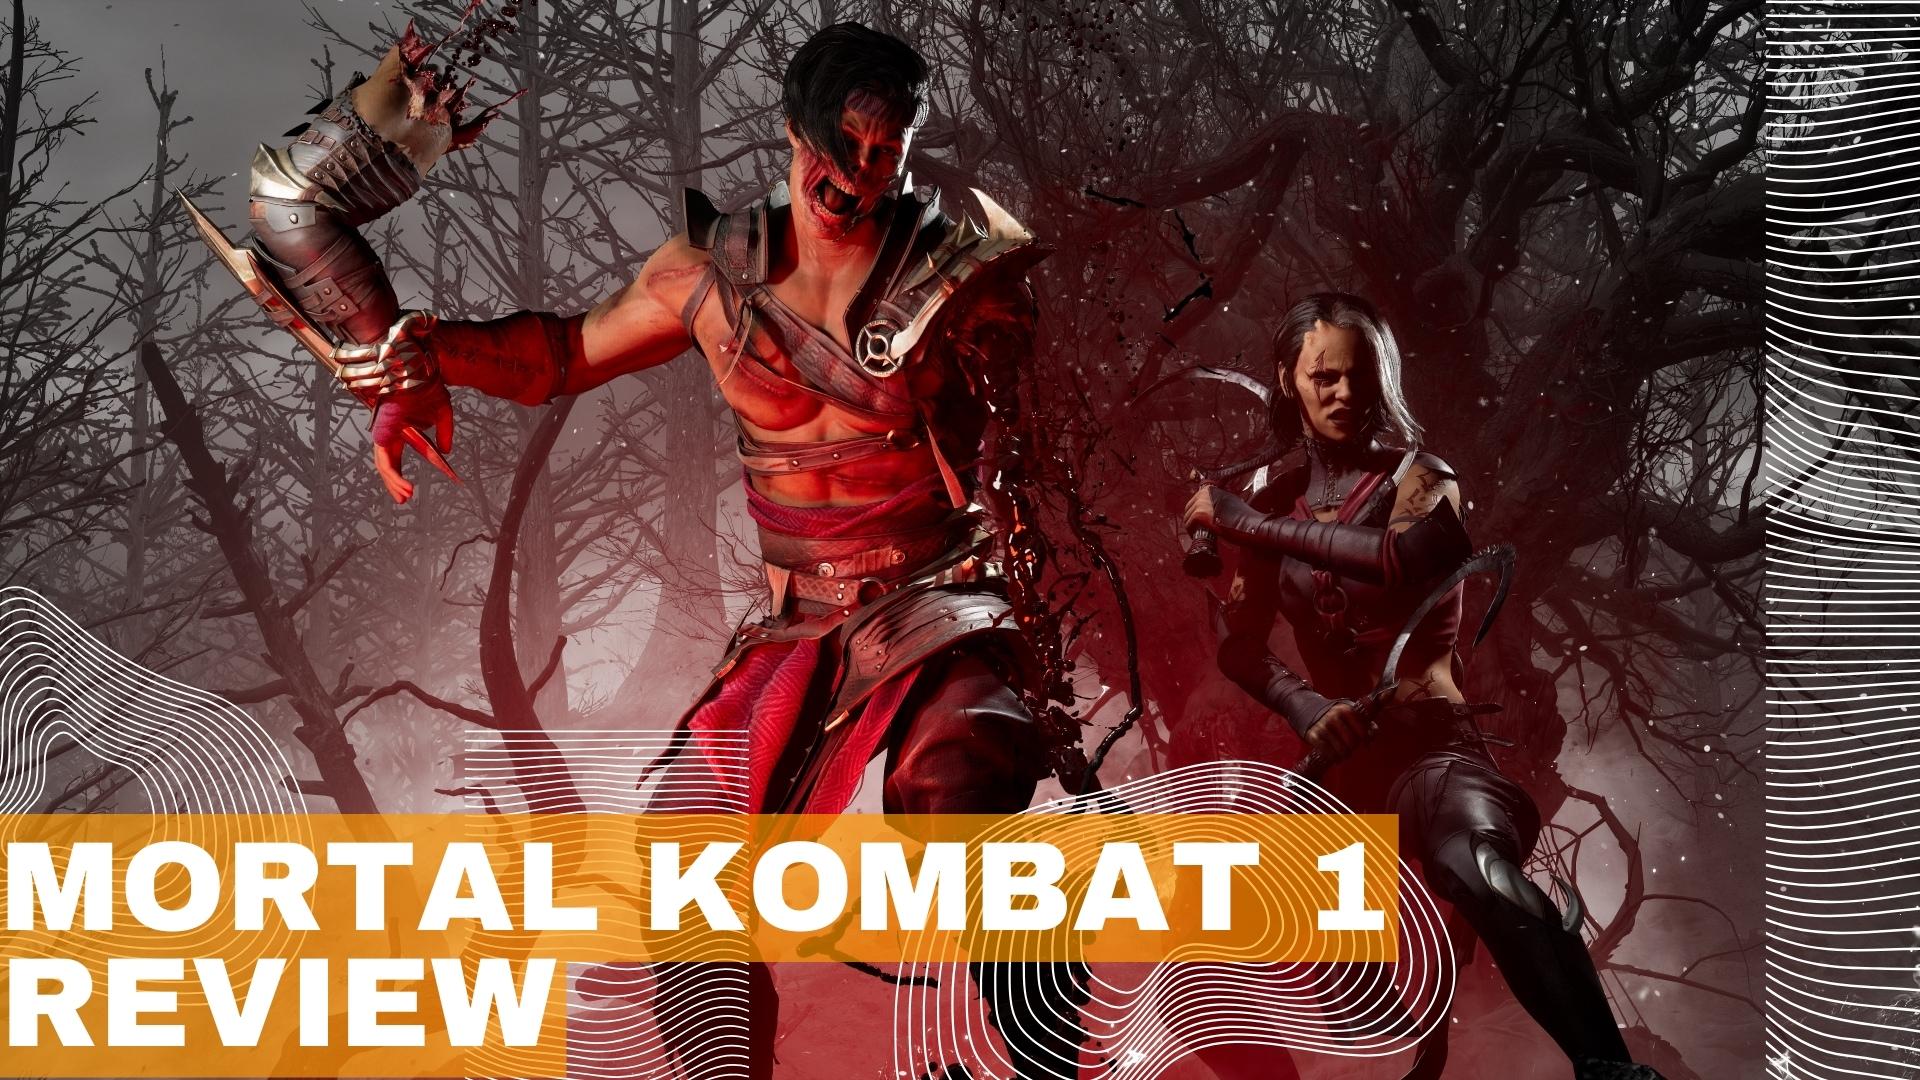 On the day of release, Mortal Kombat 1's online peak reached 38 000  players, and the game received 77% positive reviews on Steam